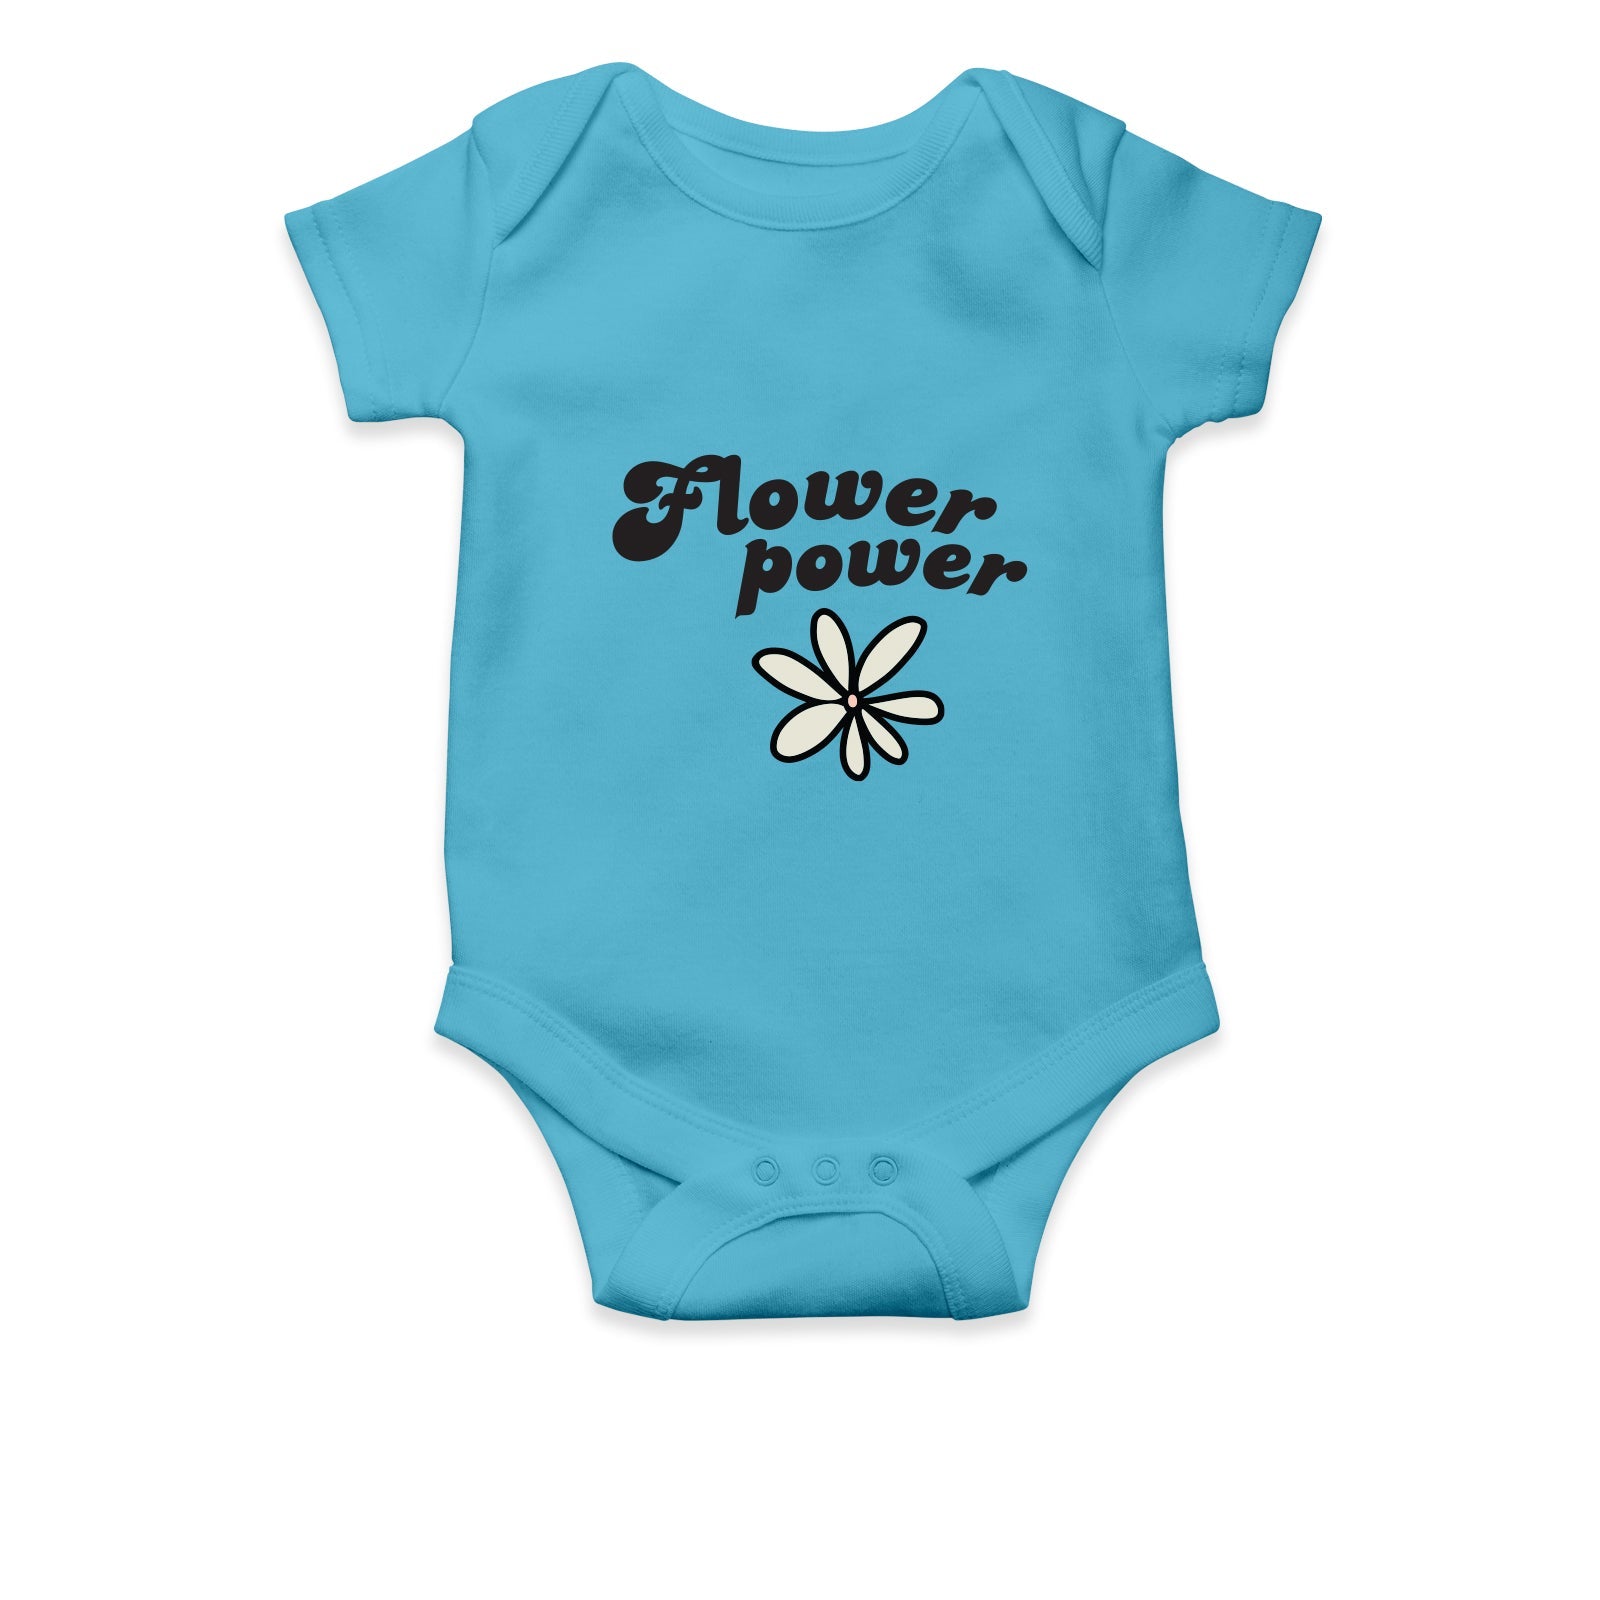 Personalised White Baby Body Suit Grow Vest - Flowers